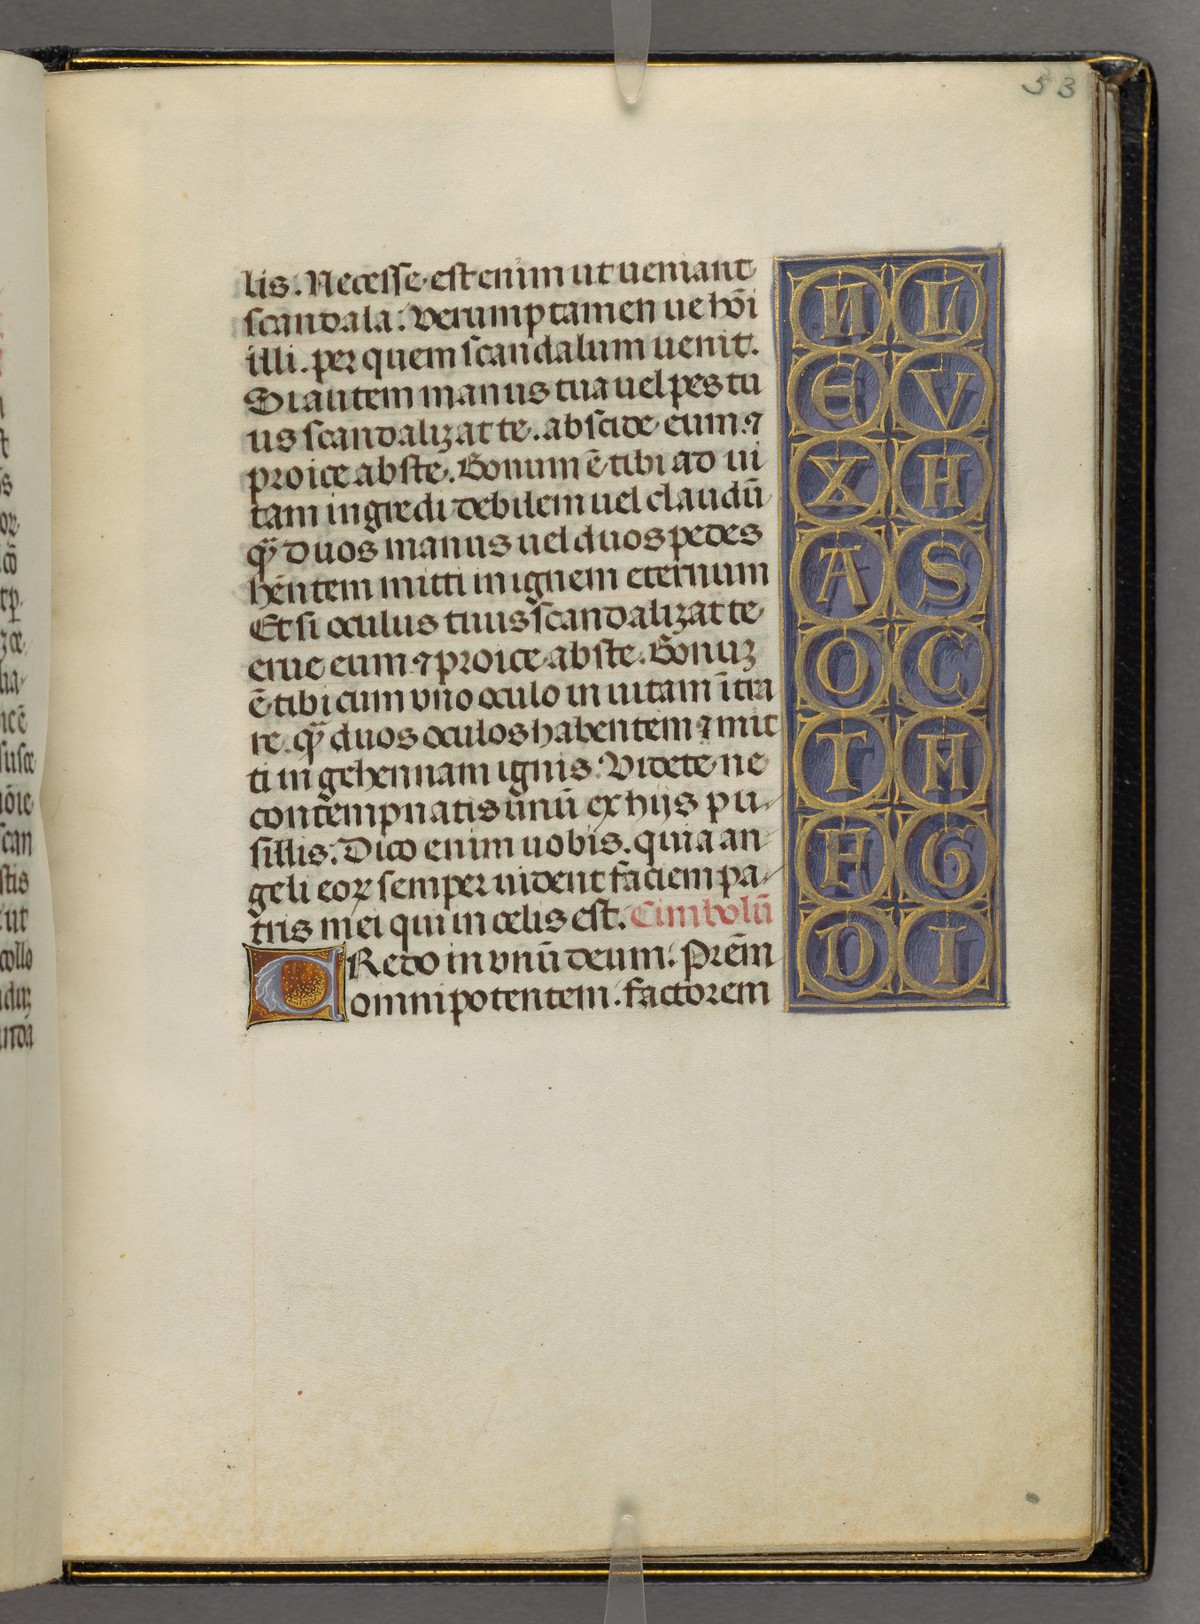 1480 ca Emerson-White Hours use of Rome Harvard University, Houghton Library, MSS Typ 443 fol 53r